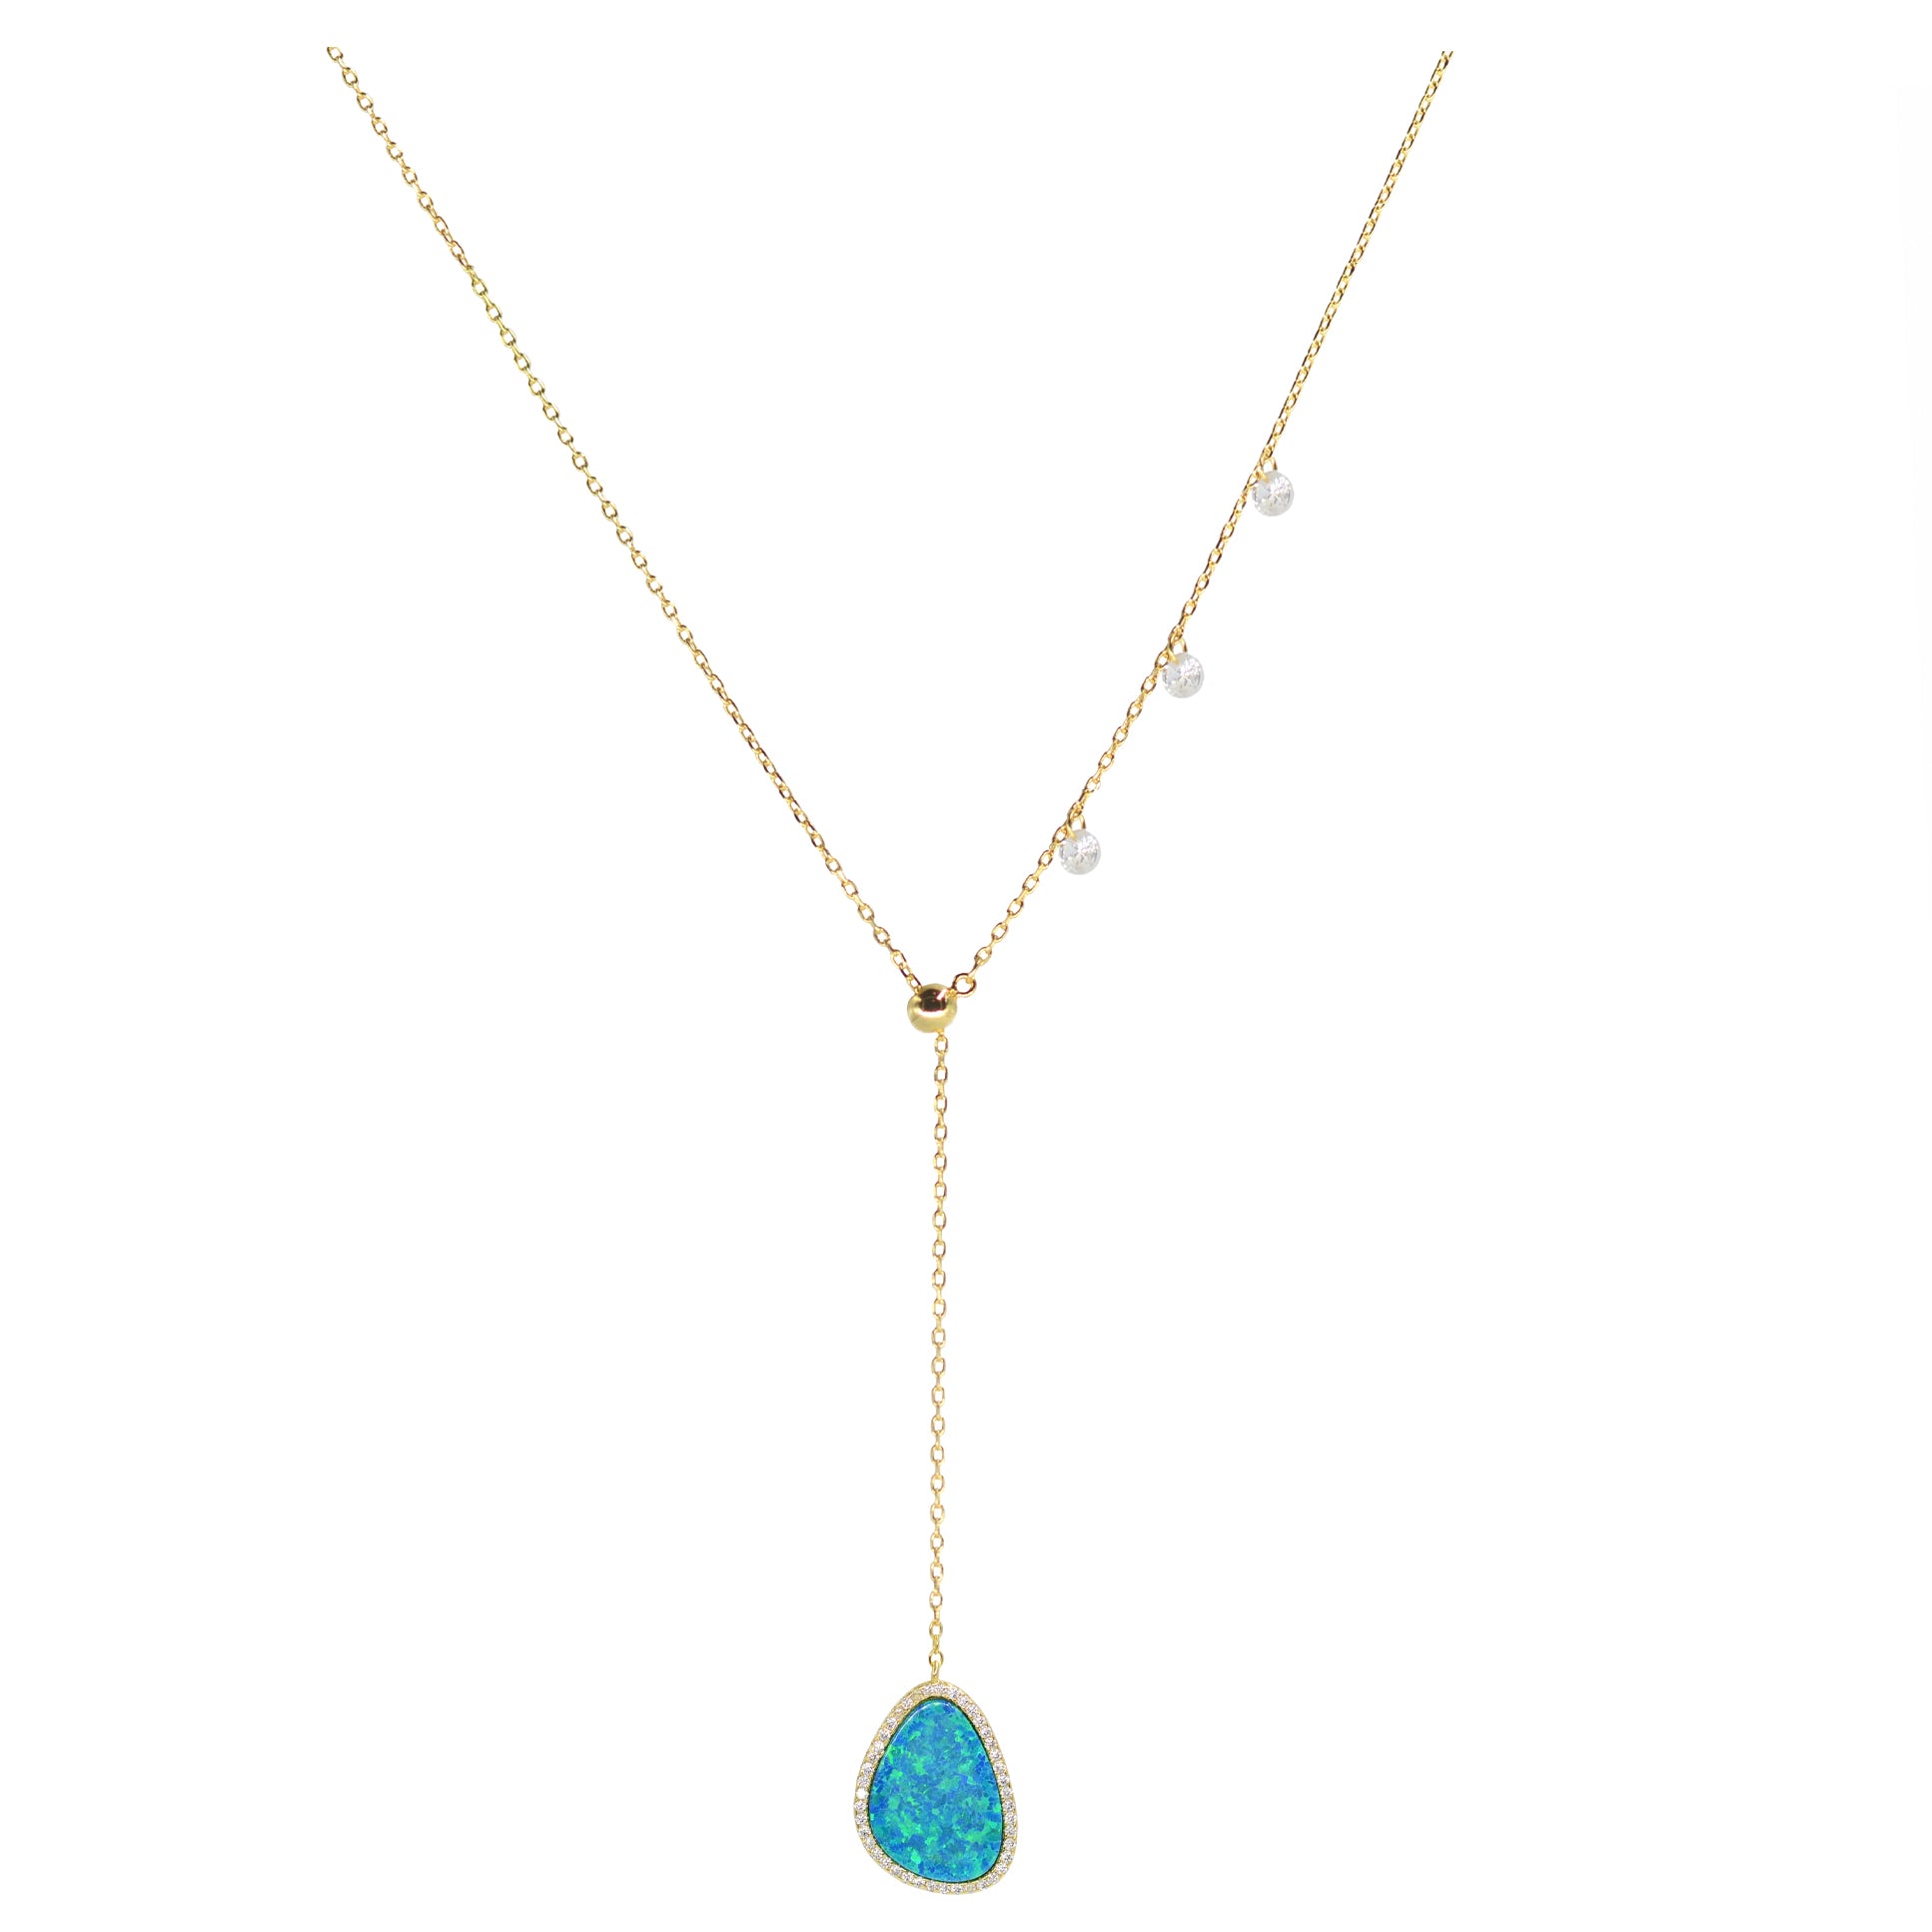 Triple Sparkle Shaker Opal Pebble Lariat Necklace (Available in 3 Colors)